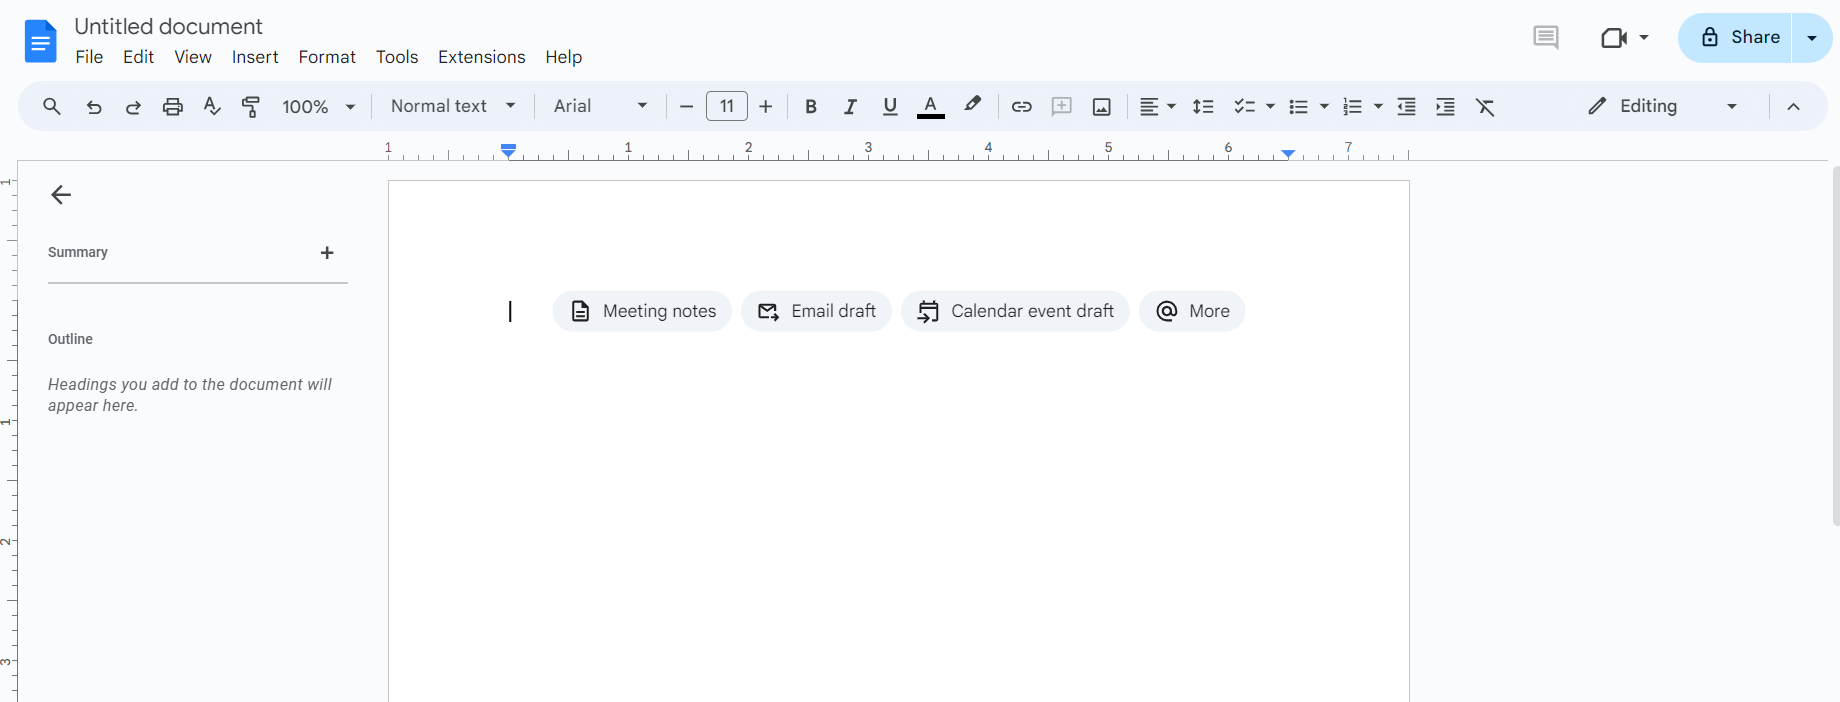 This is the Google Docs content editor tool.